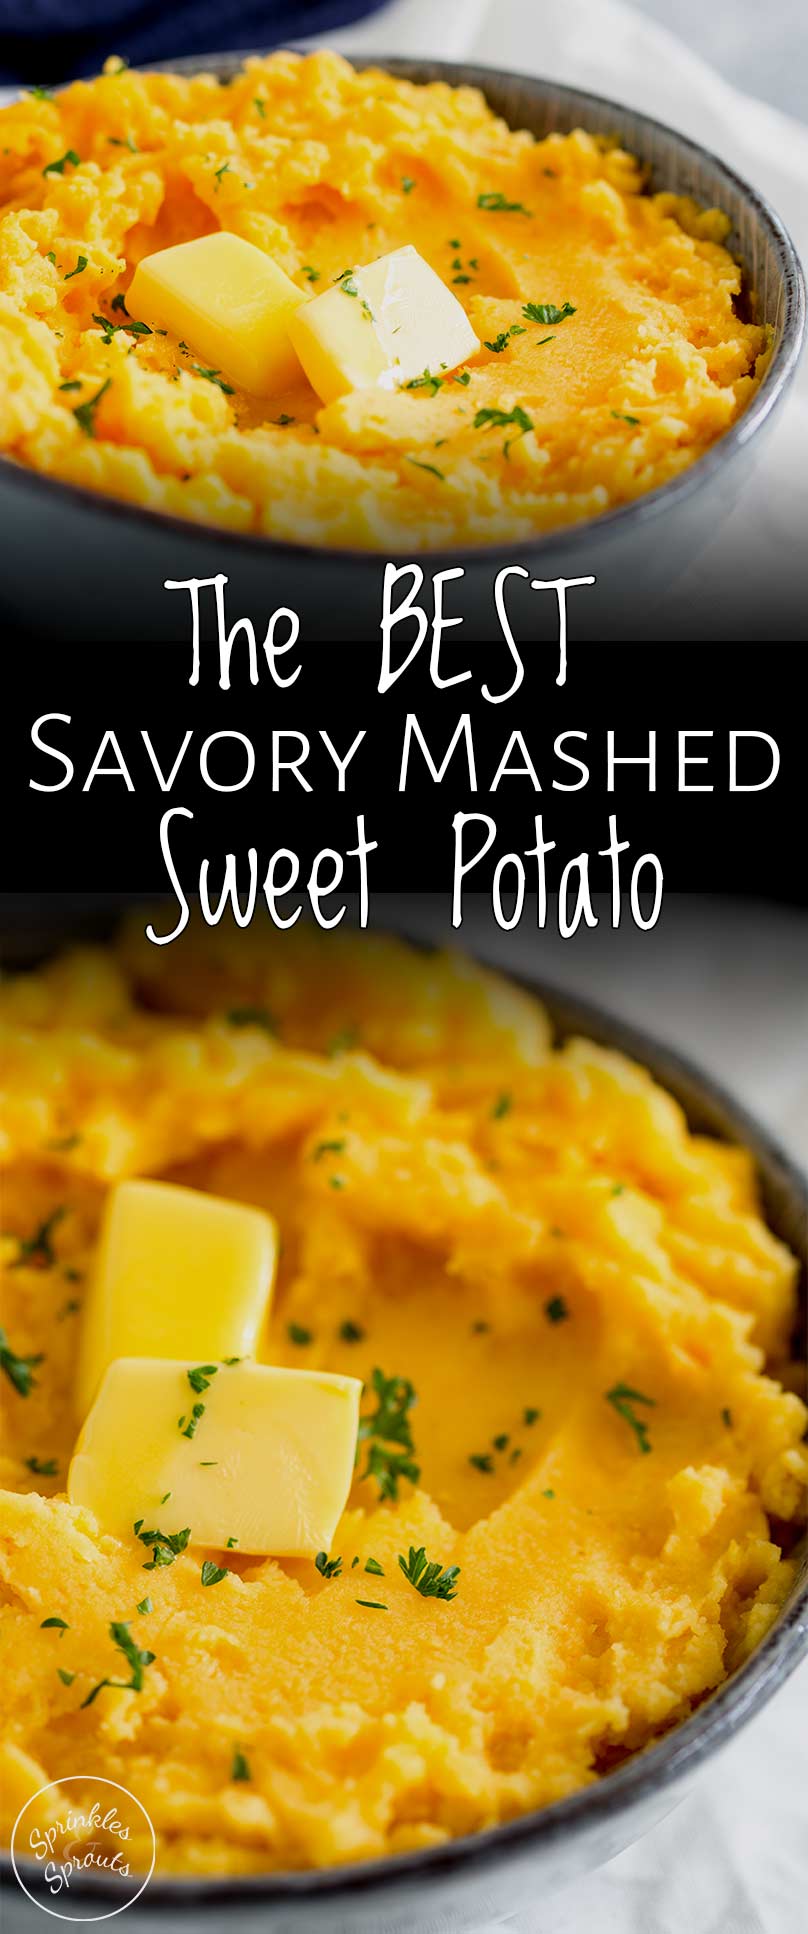 split photo of sweet potato mash with text in the middle